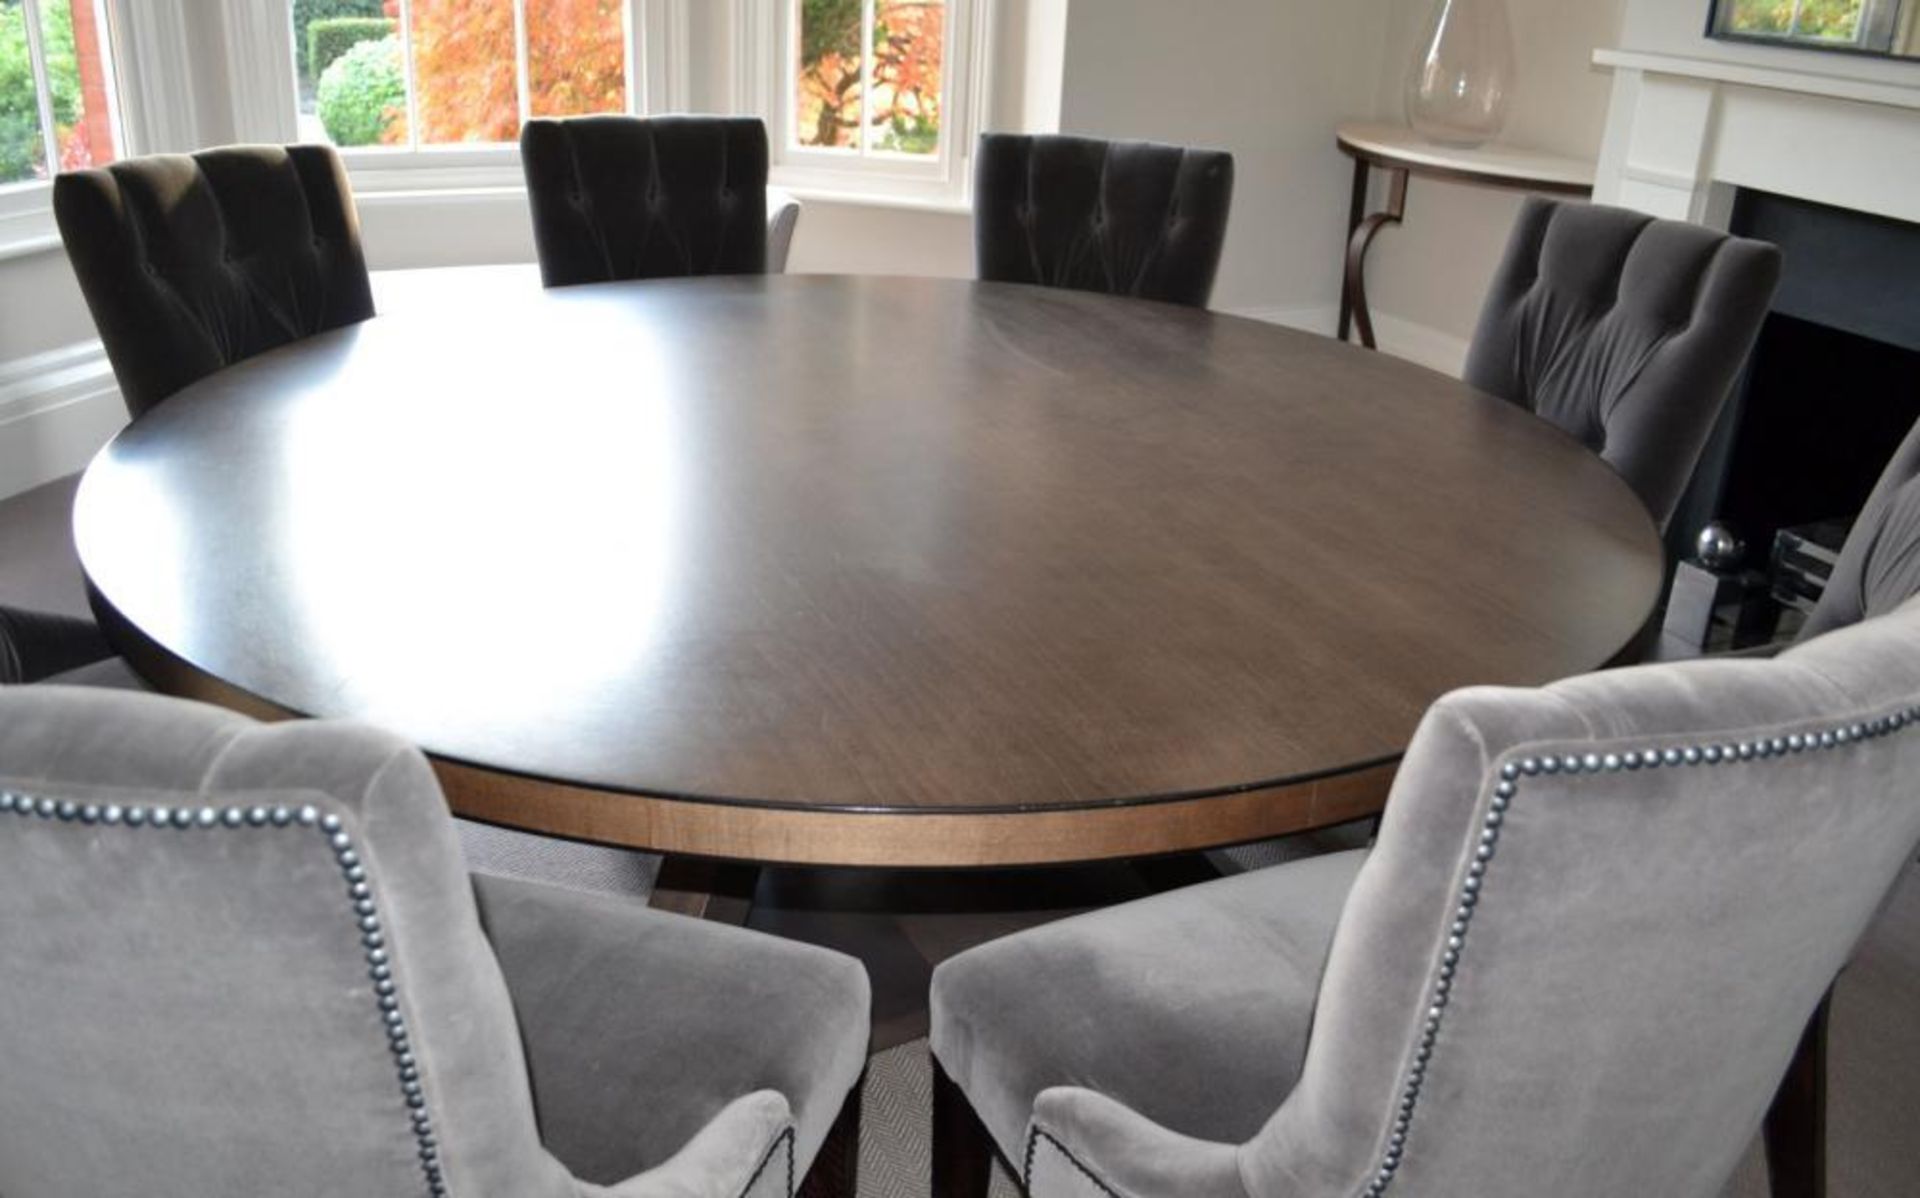 1 x Bespoke Round Dining Table With Sycamore Wood Finish - 1800mm Diameter - Ideal For Family Gather - Image 14 of 14